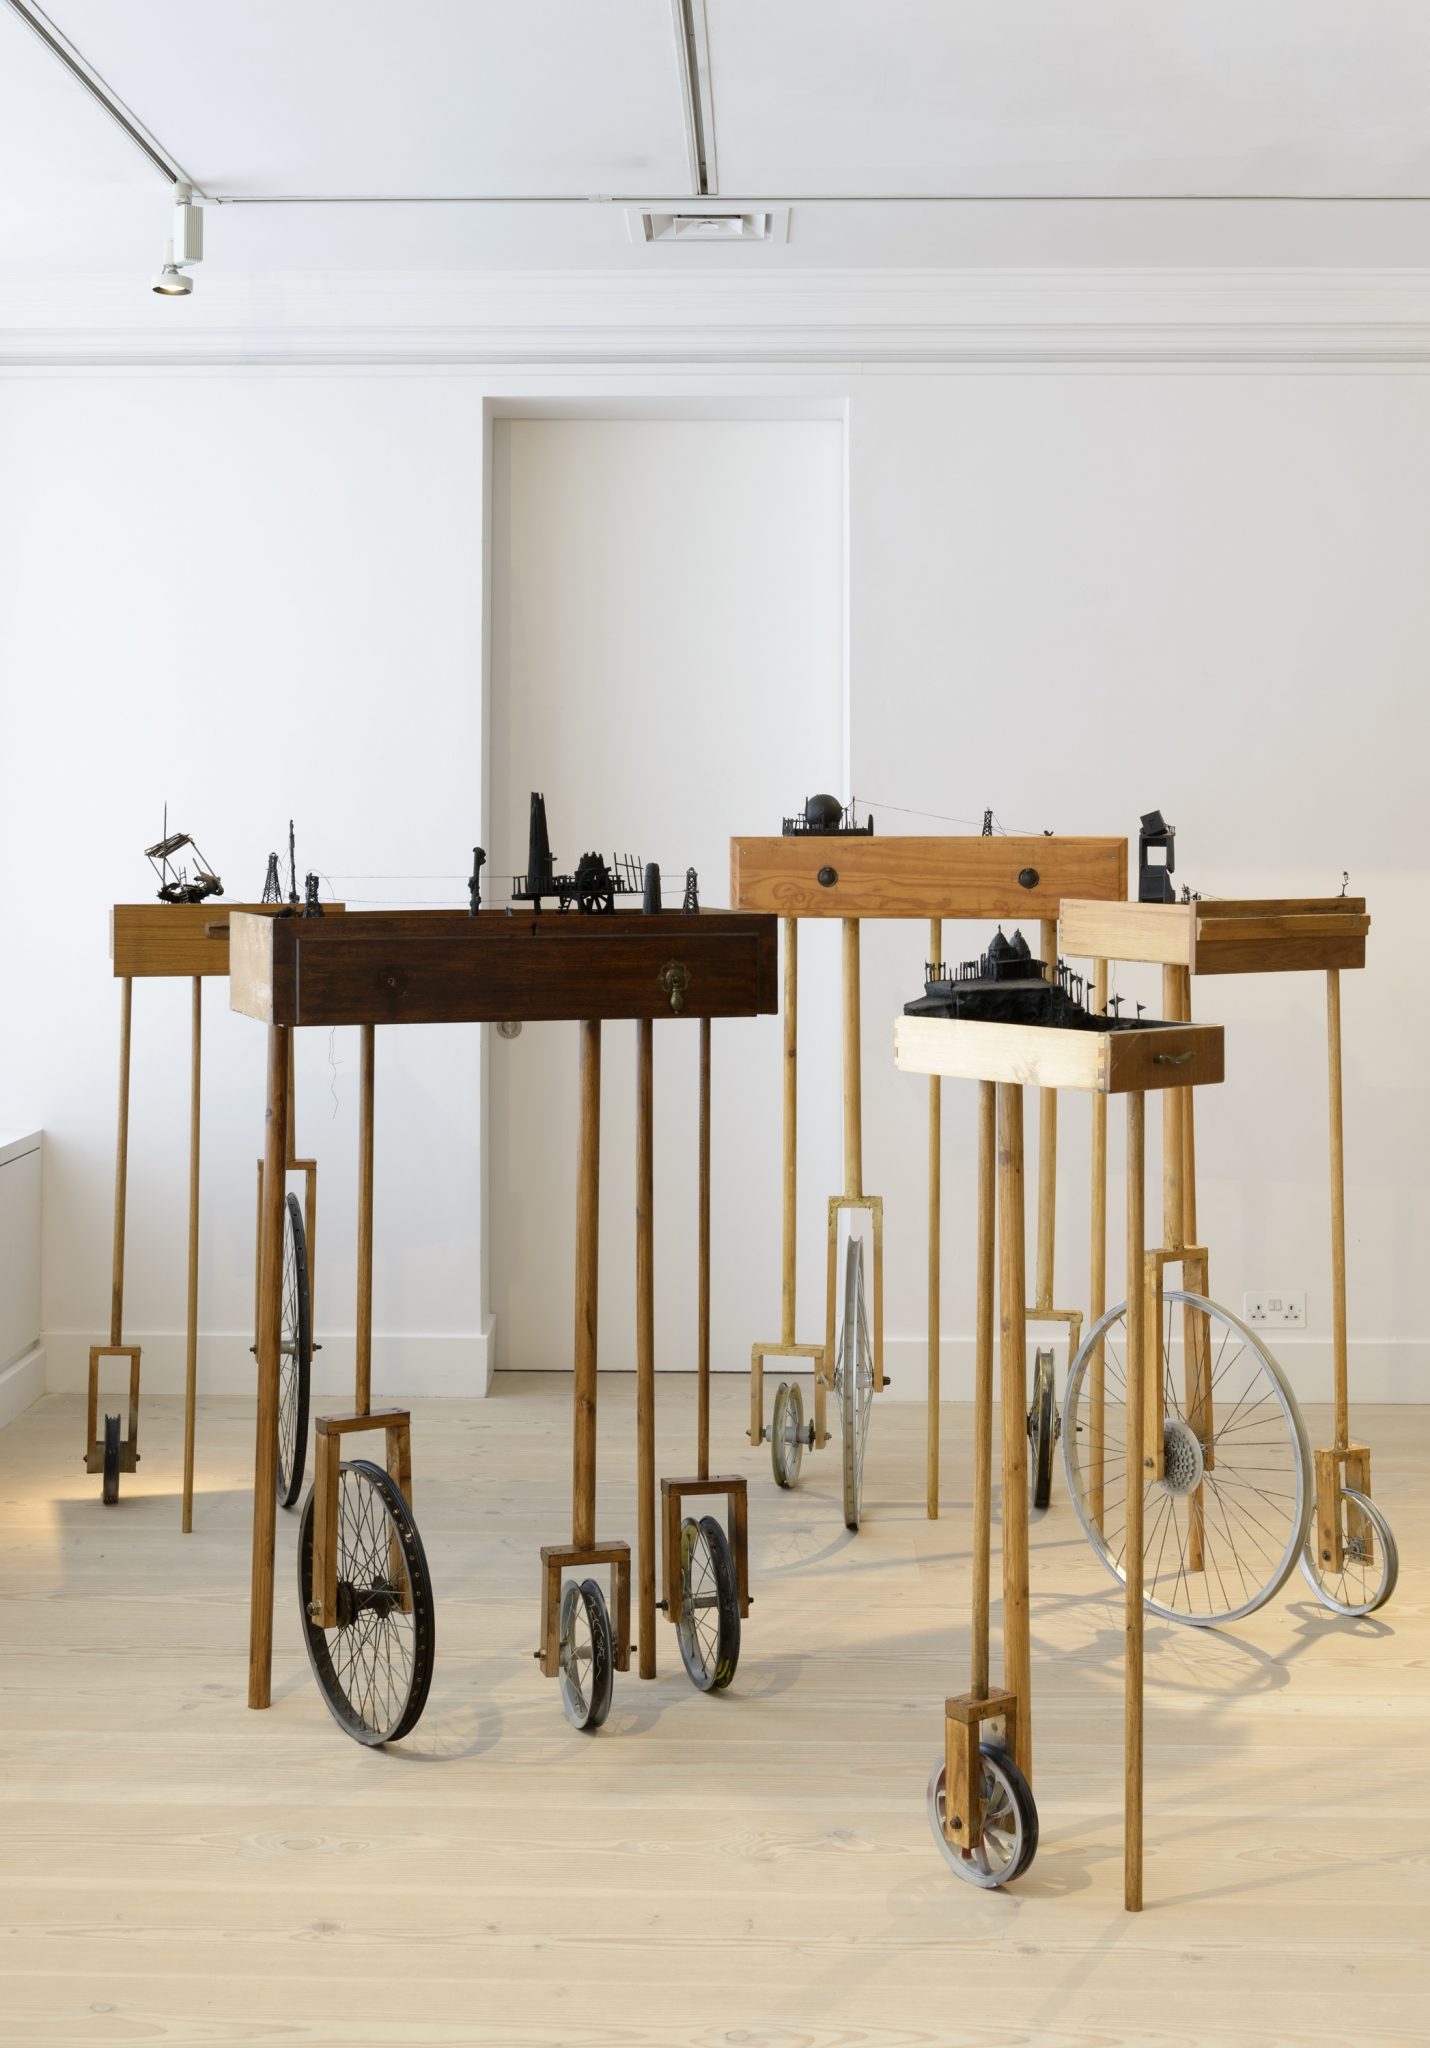 Installation view of Saad Qureshi: Other Crescents Other Rooms at Gazelli Art House, London, 2012